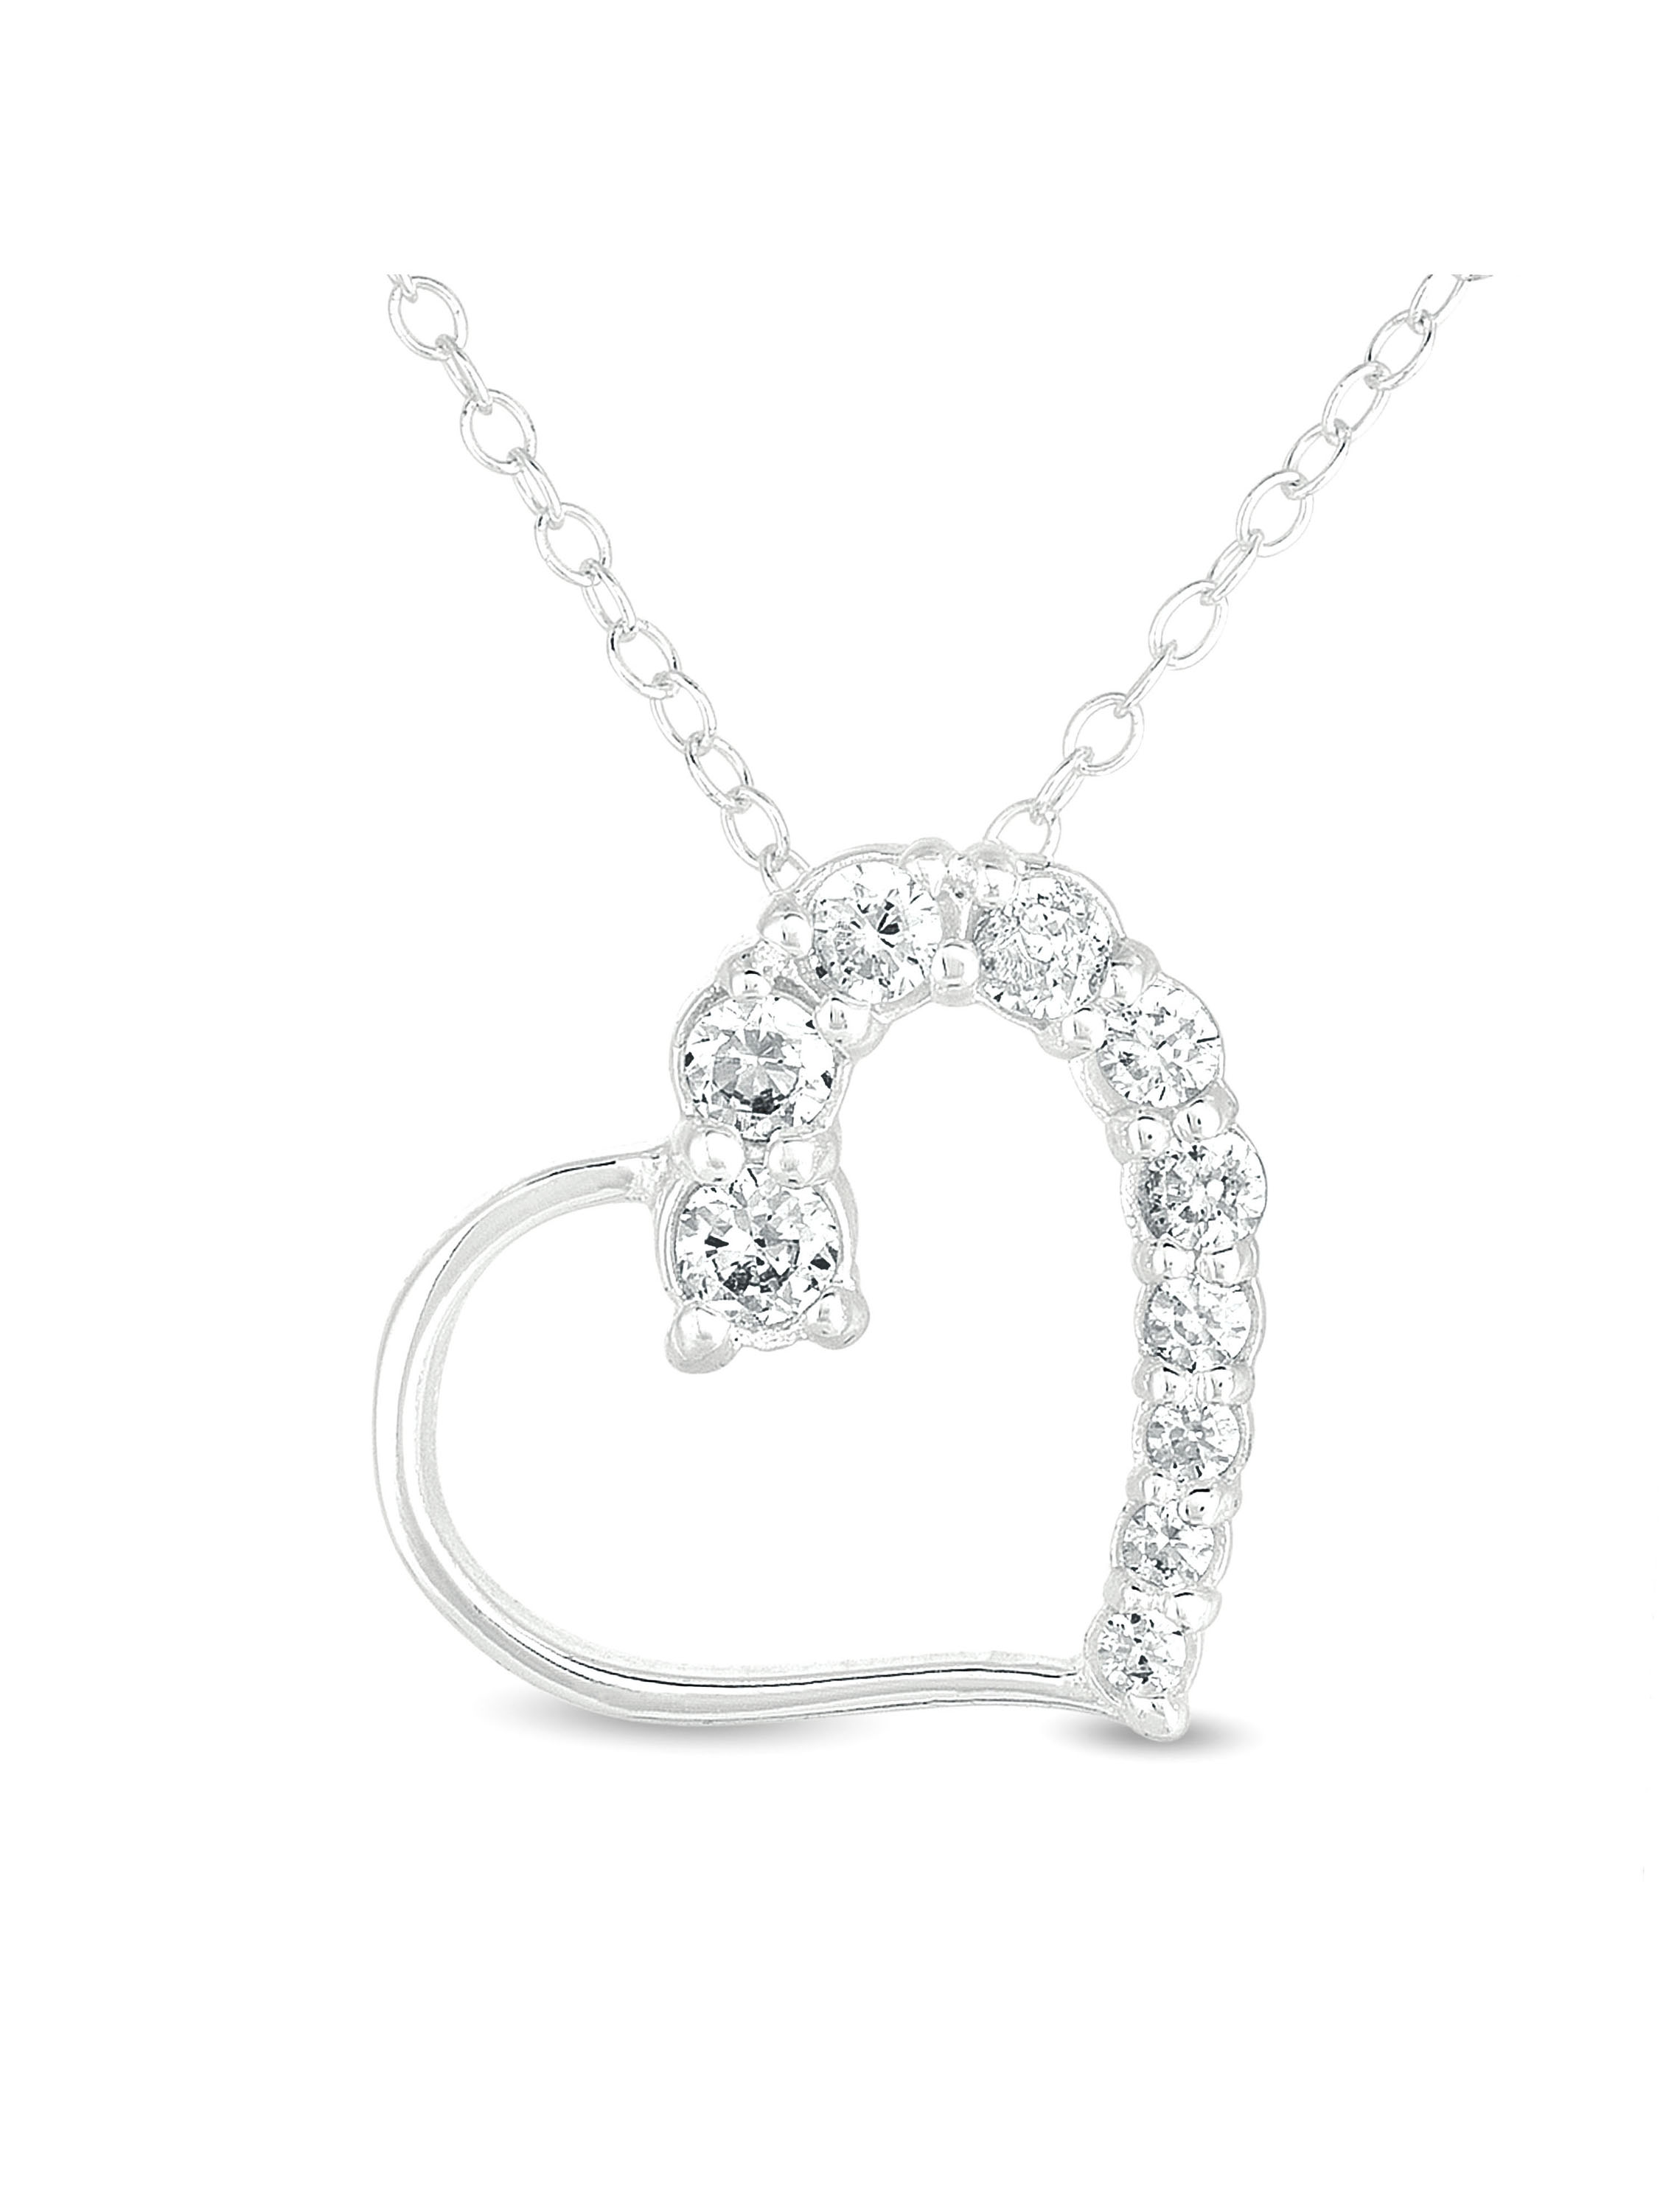 CZ Sterling Silver Heart Pendant, 18" - image 1 of 4